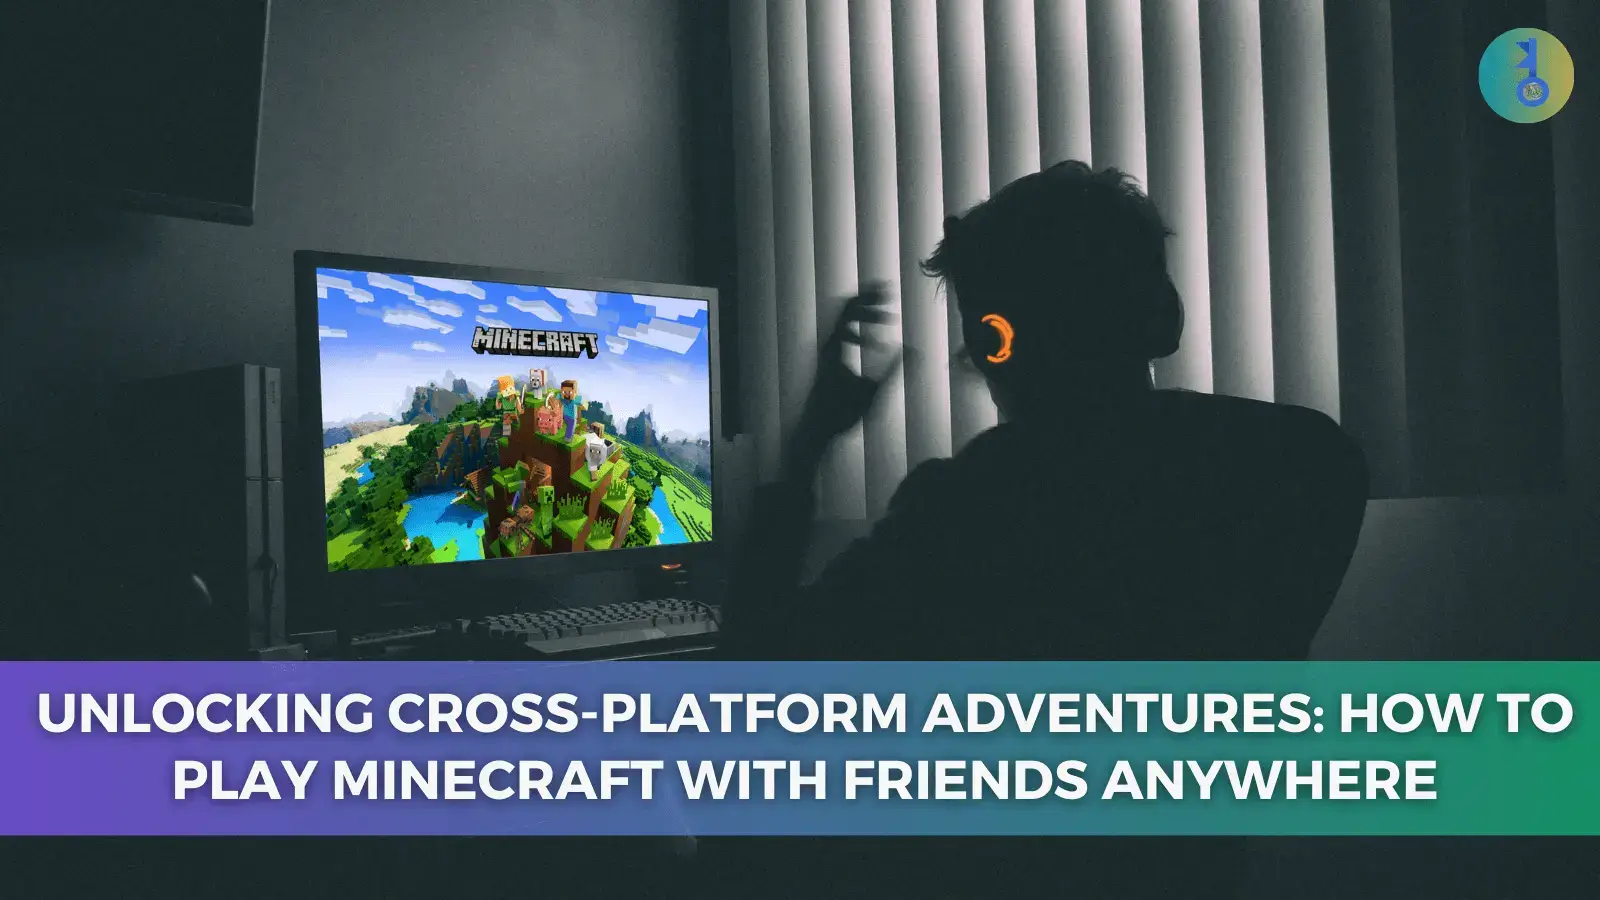 Unlocking Cross-Platform Adventures How to Play Minecraft with Friends Anywhere